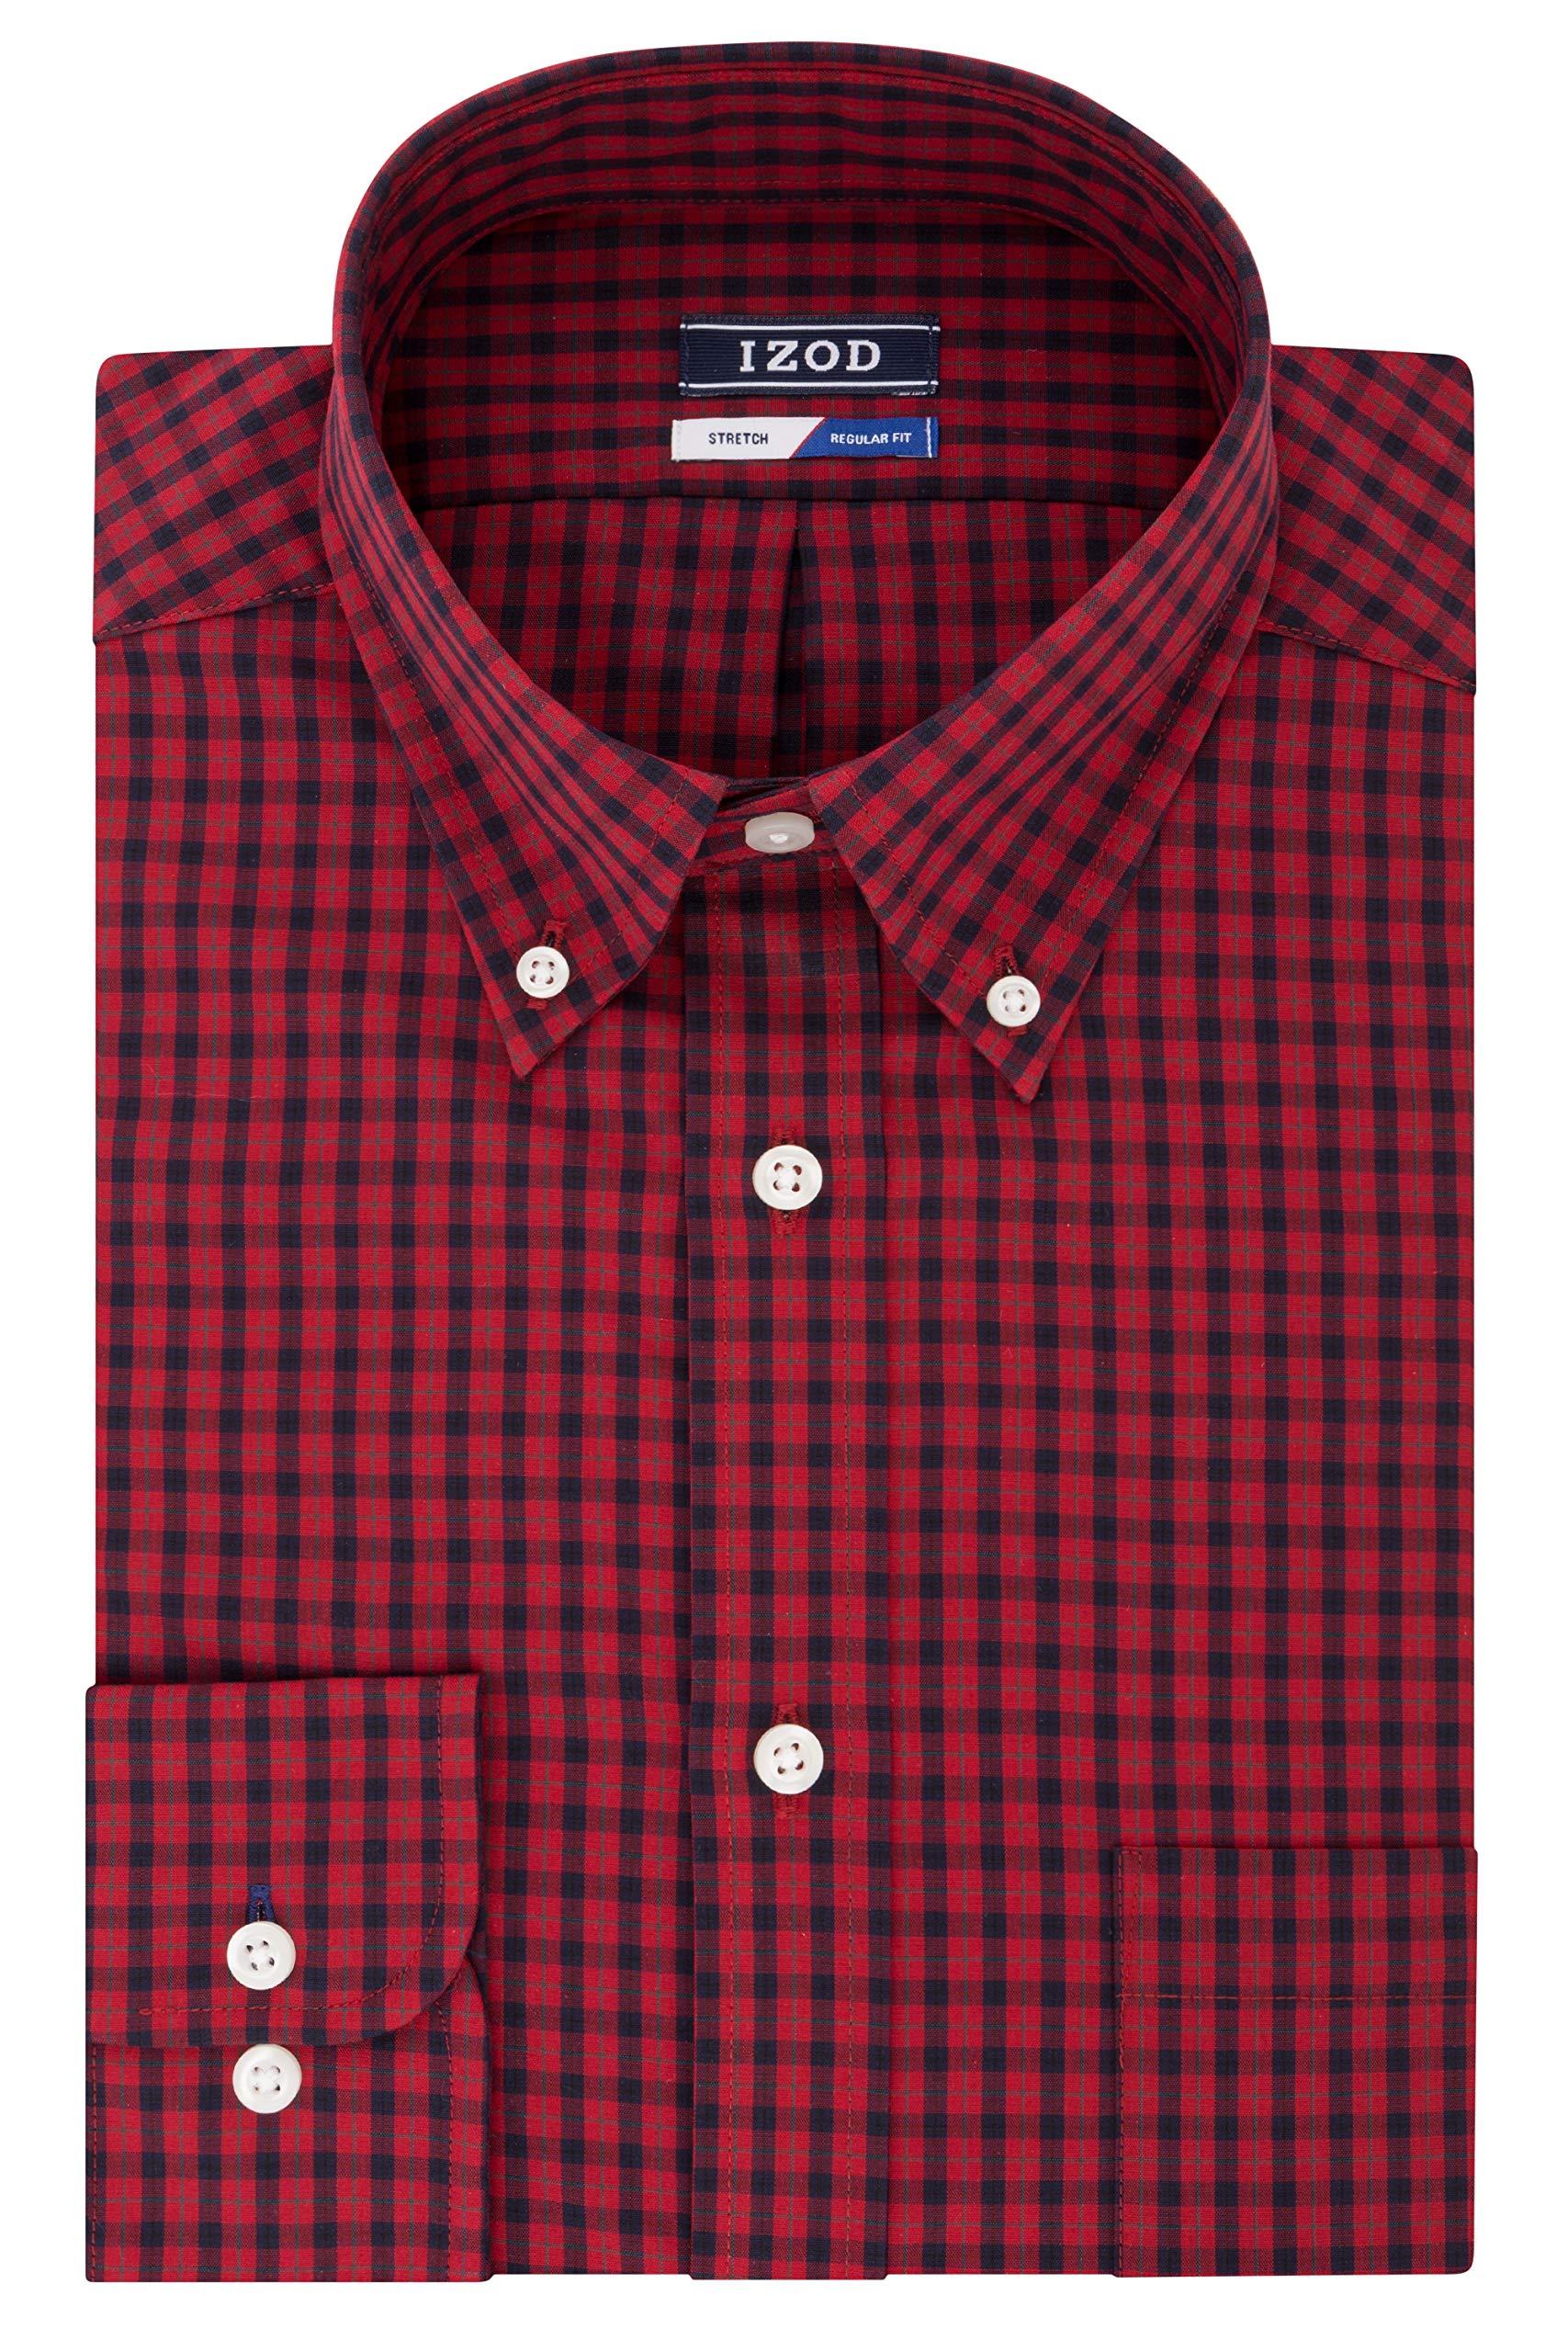 red and black mens button down shirt